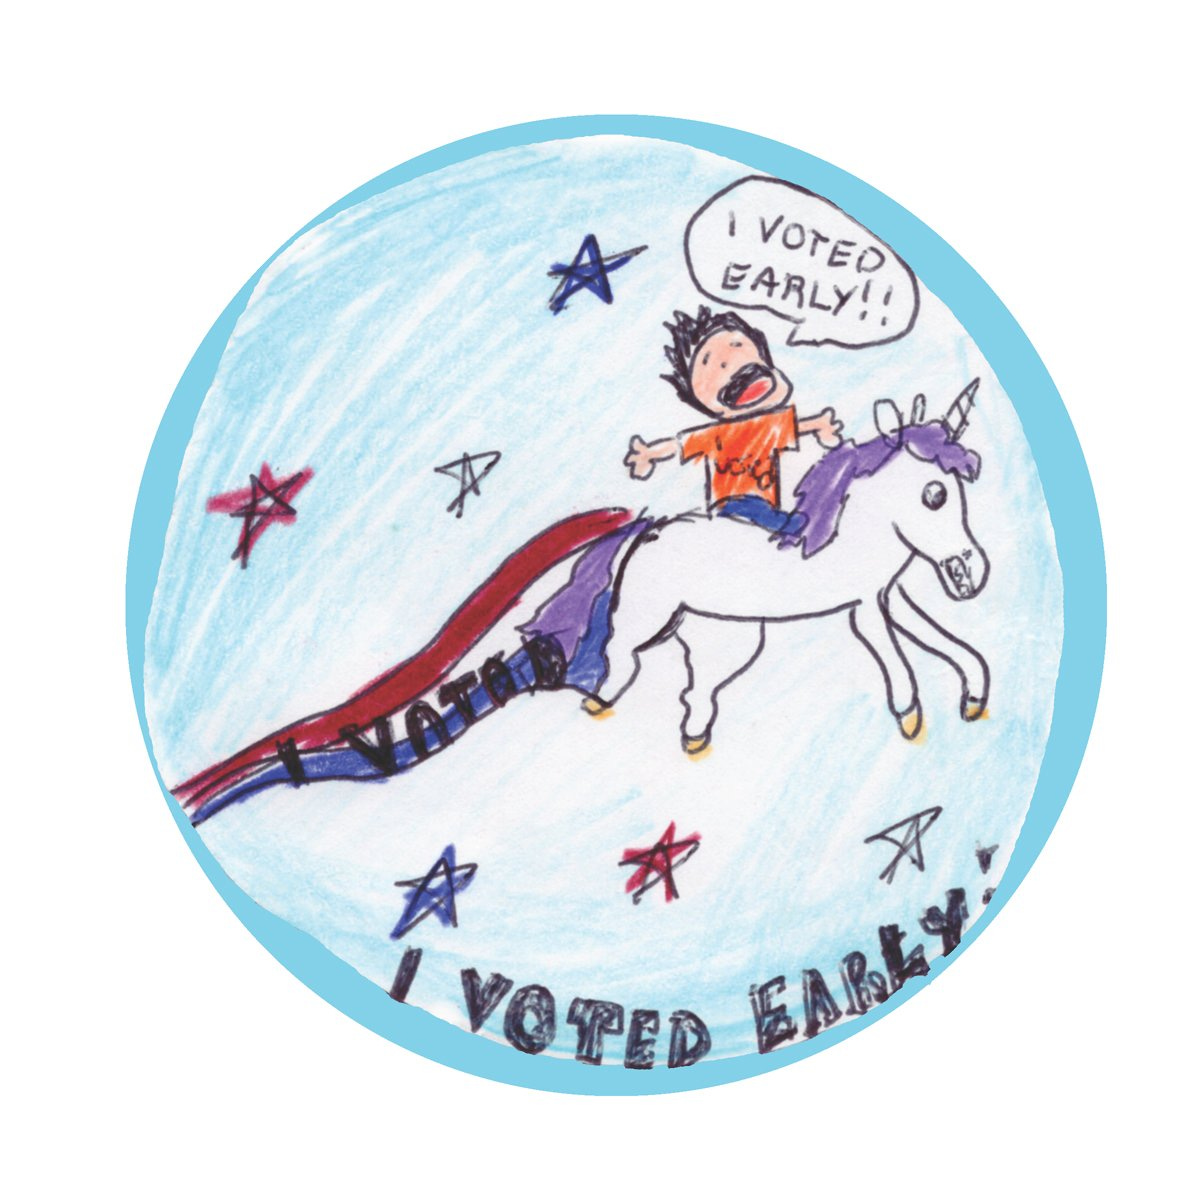 "I Voted Early" sticker featuring a boy riding a unicorn.